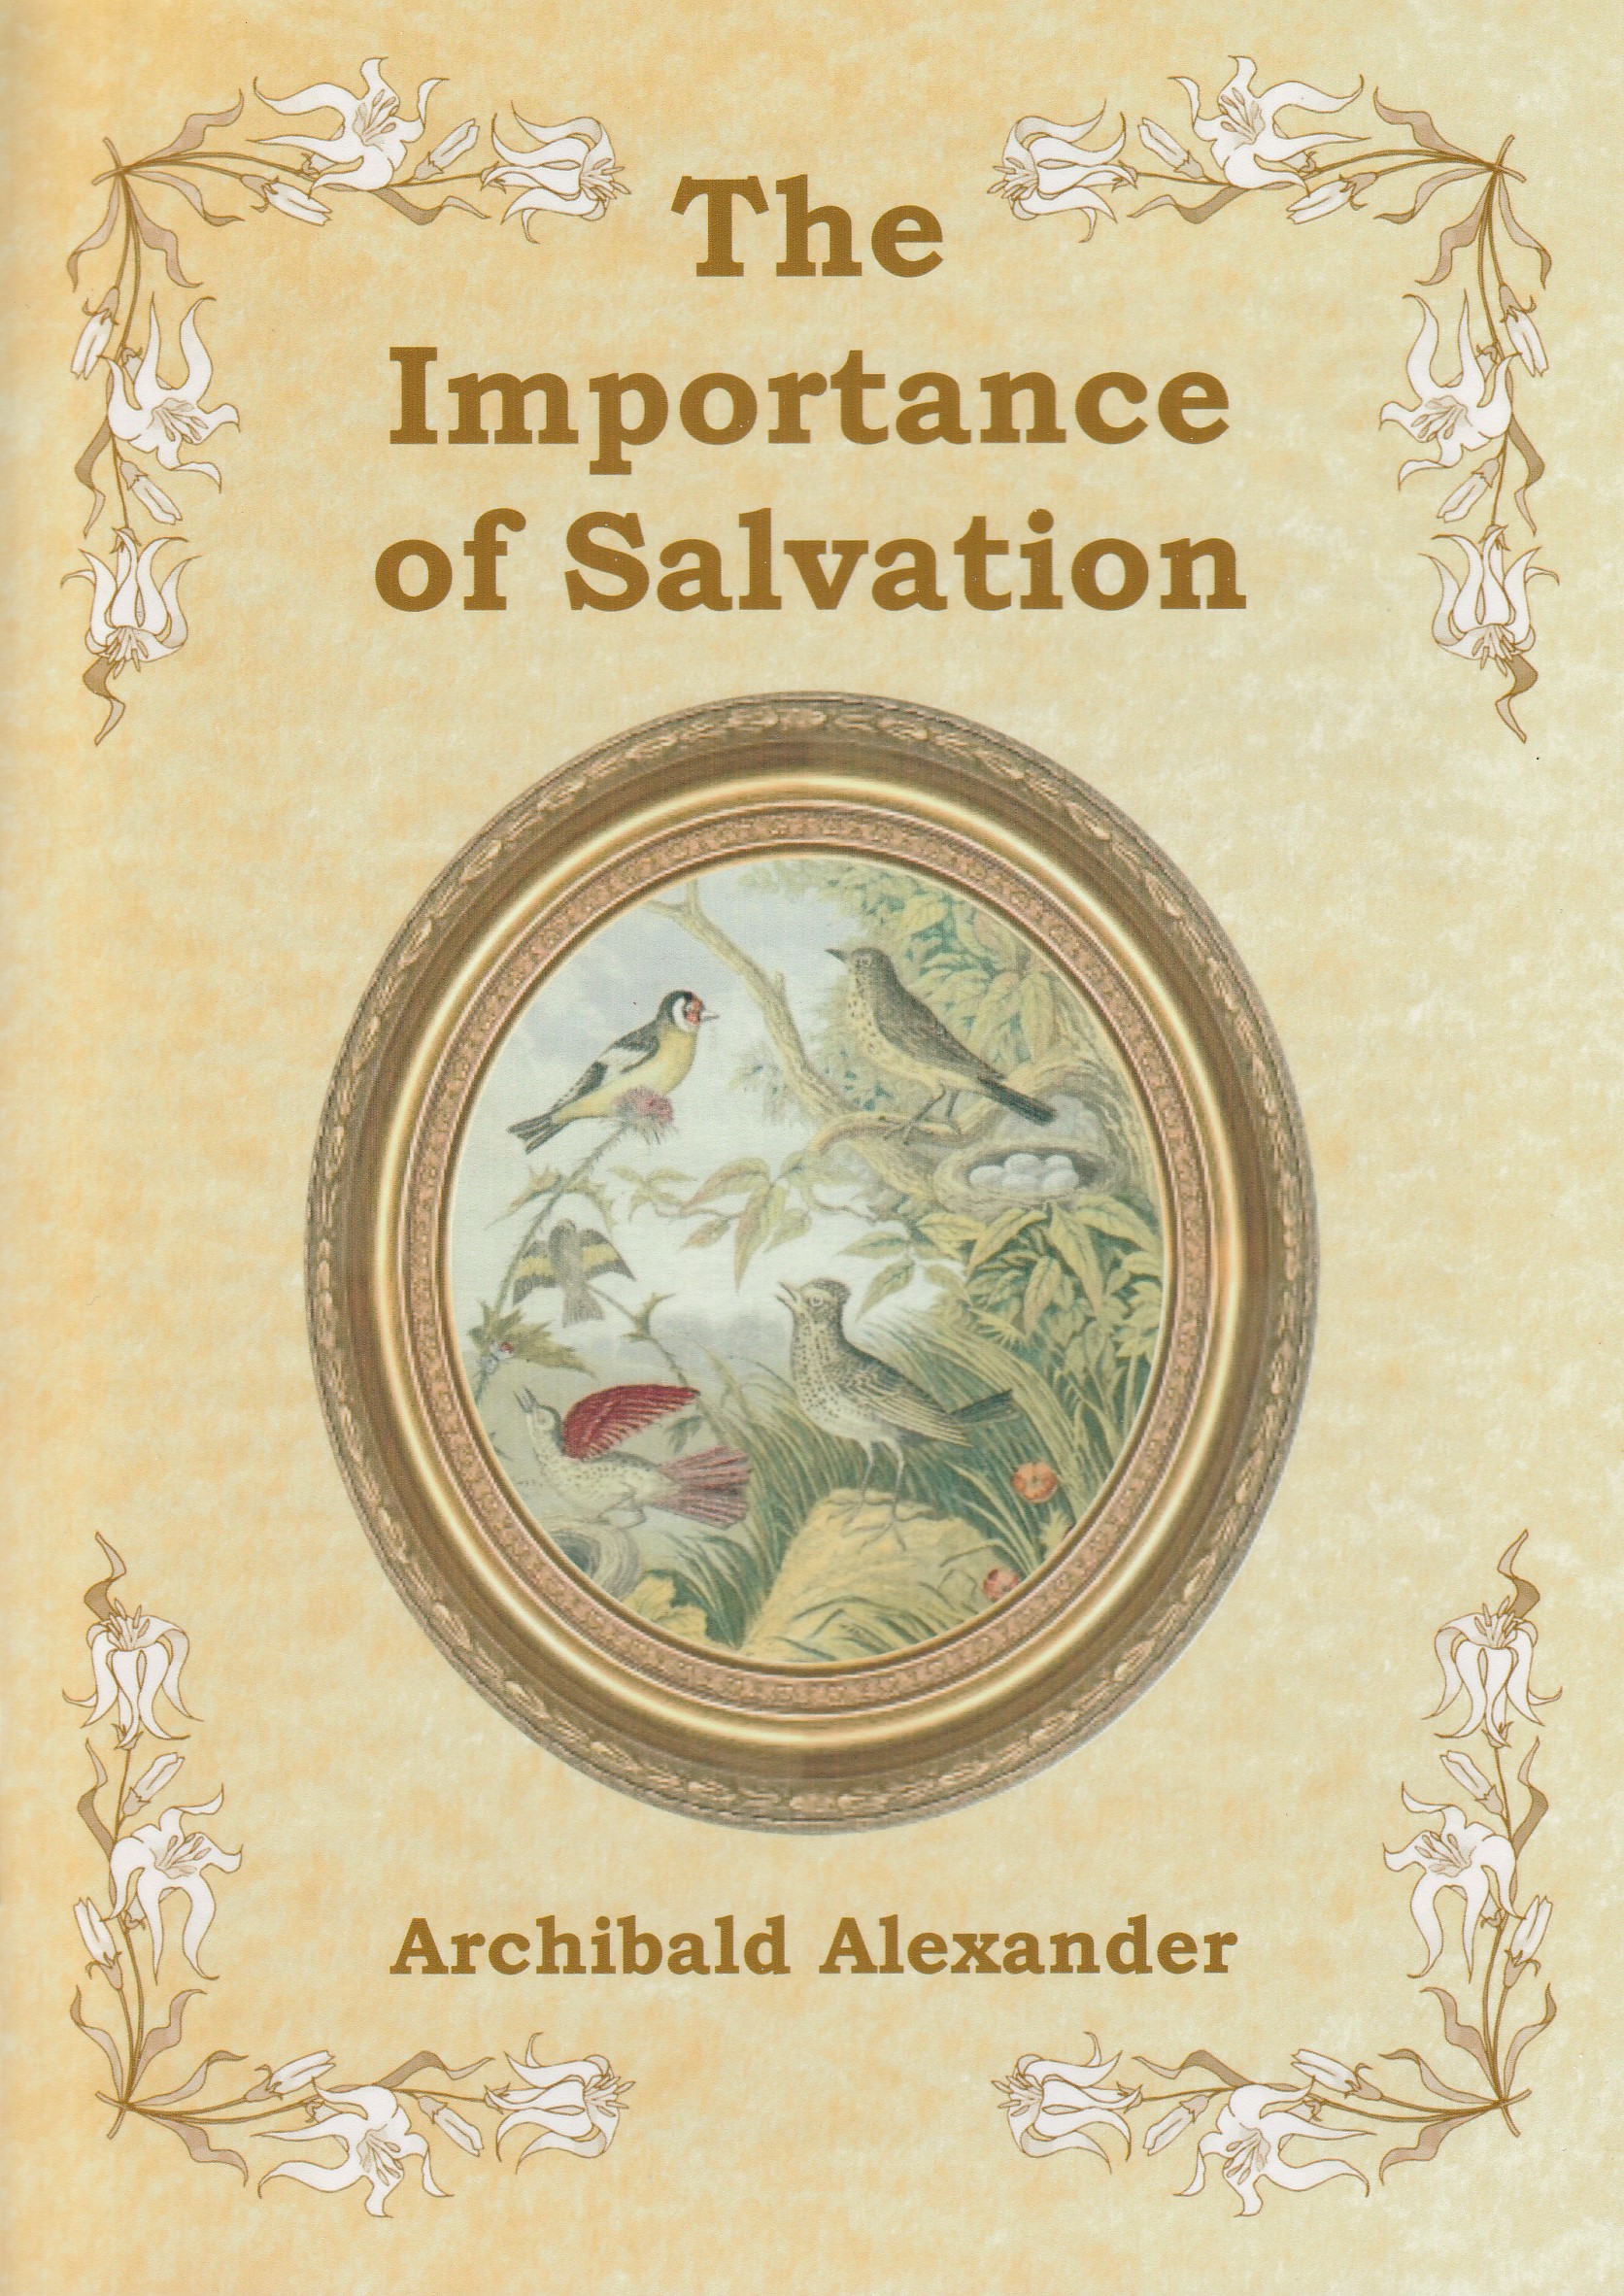 The Importance of Salvation